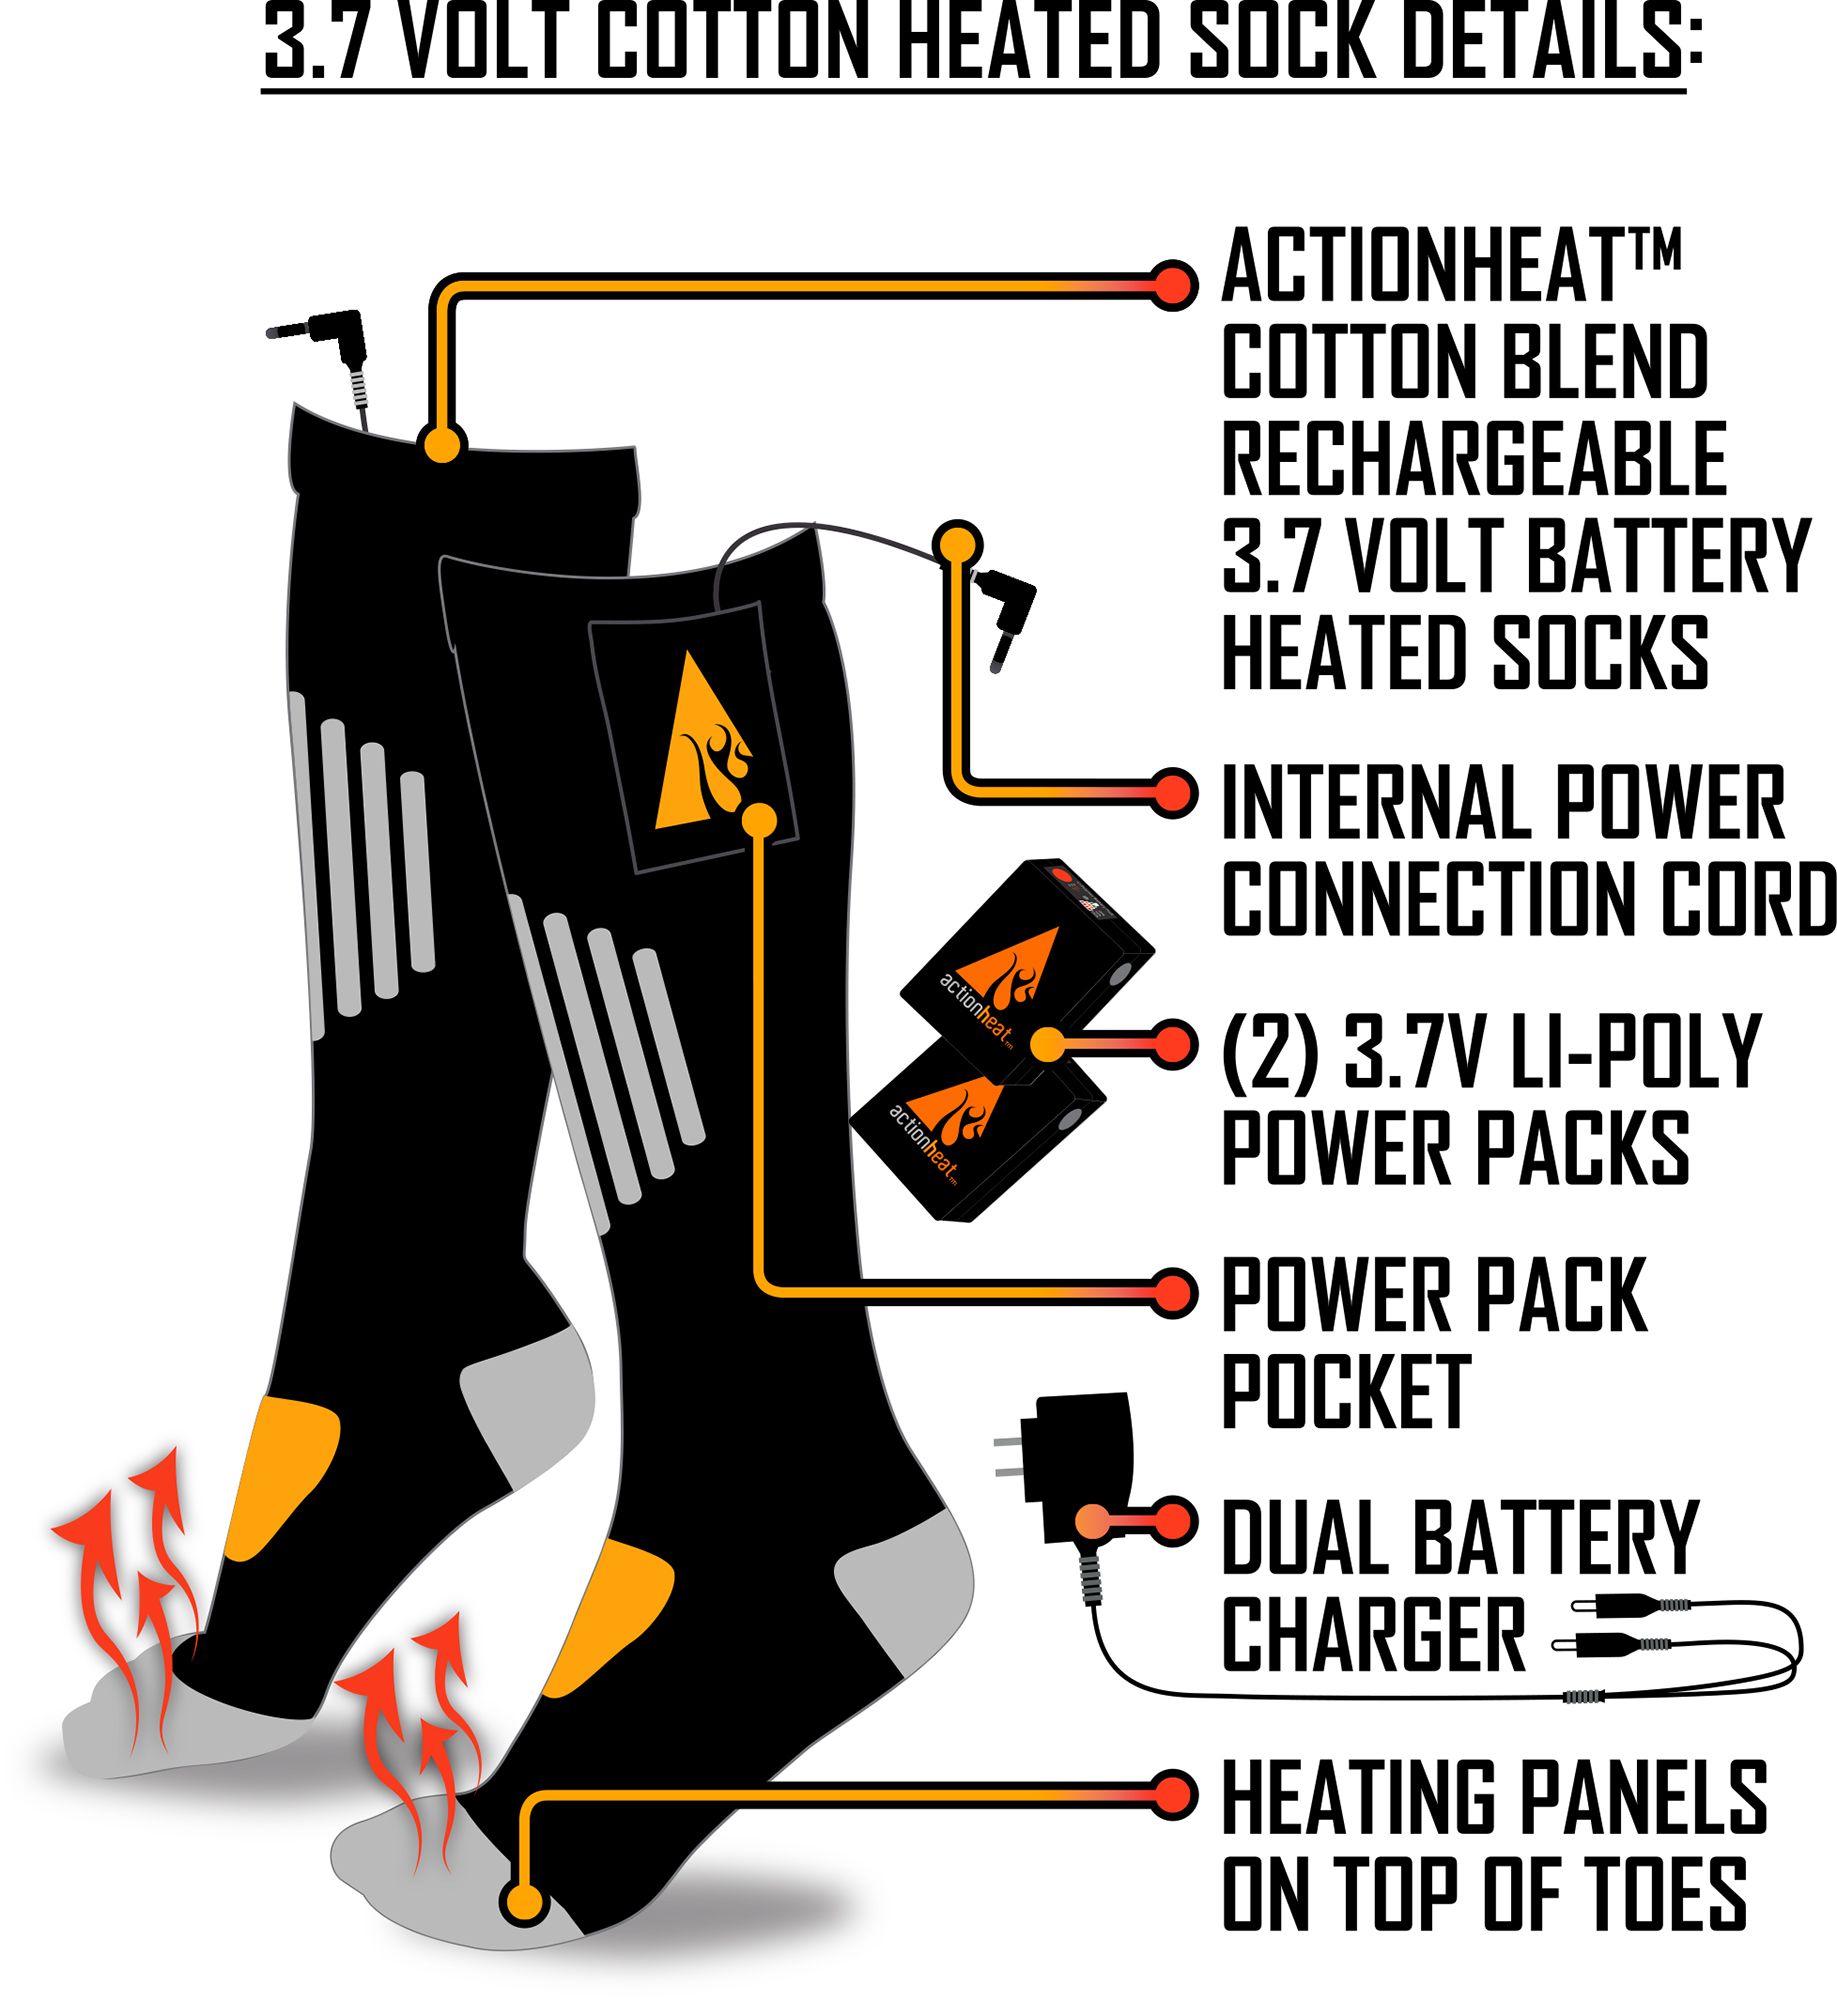 ActionHeat 3V Cotton Rechargeable Battery Heated Socks 1.0